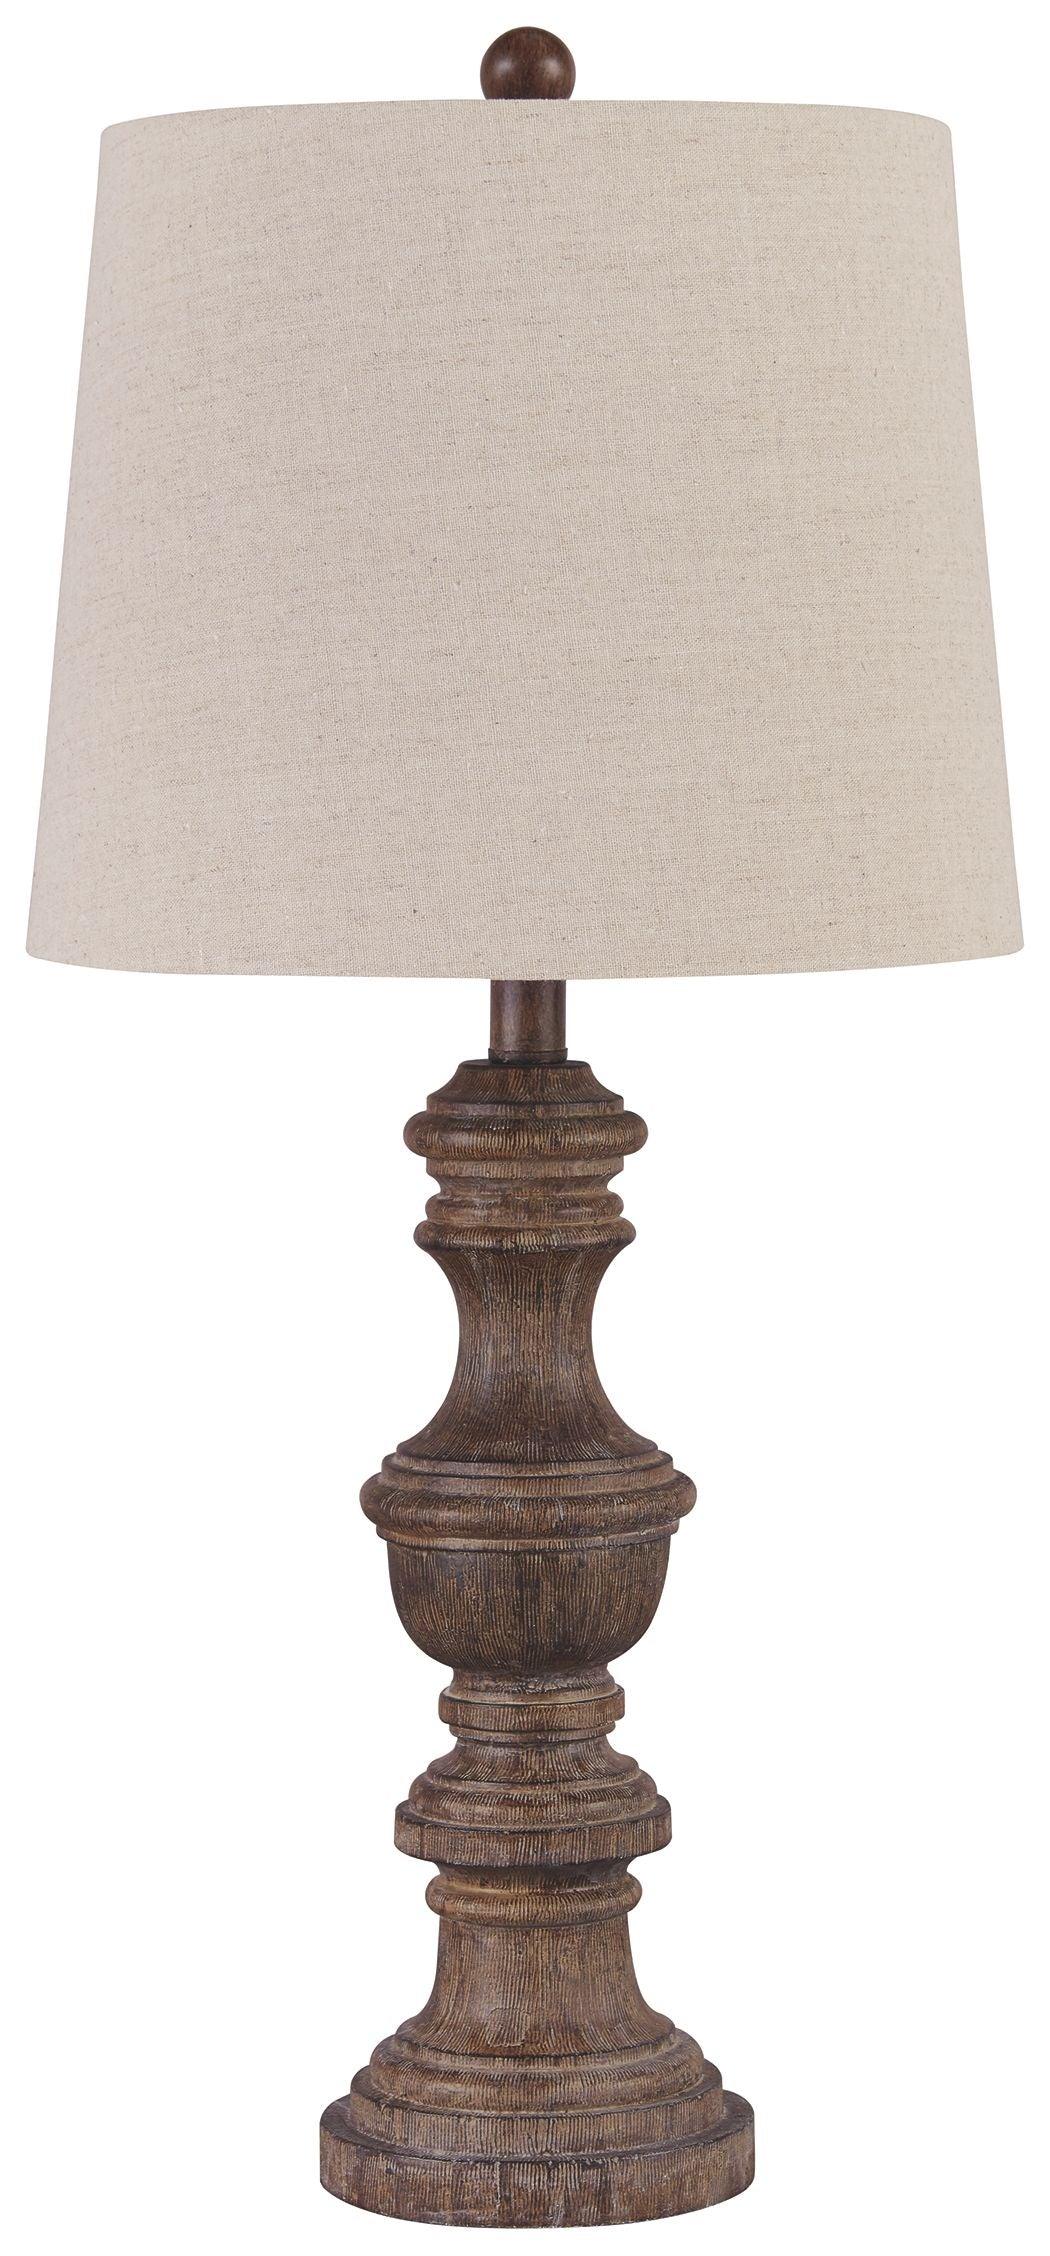 Ashley Furniture - Magaly - Table Lamp - 5th Avenue Furniture